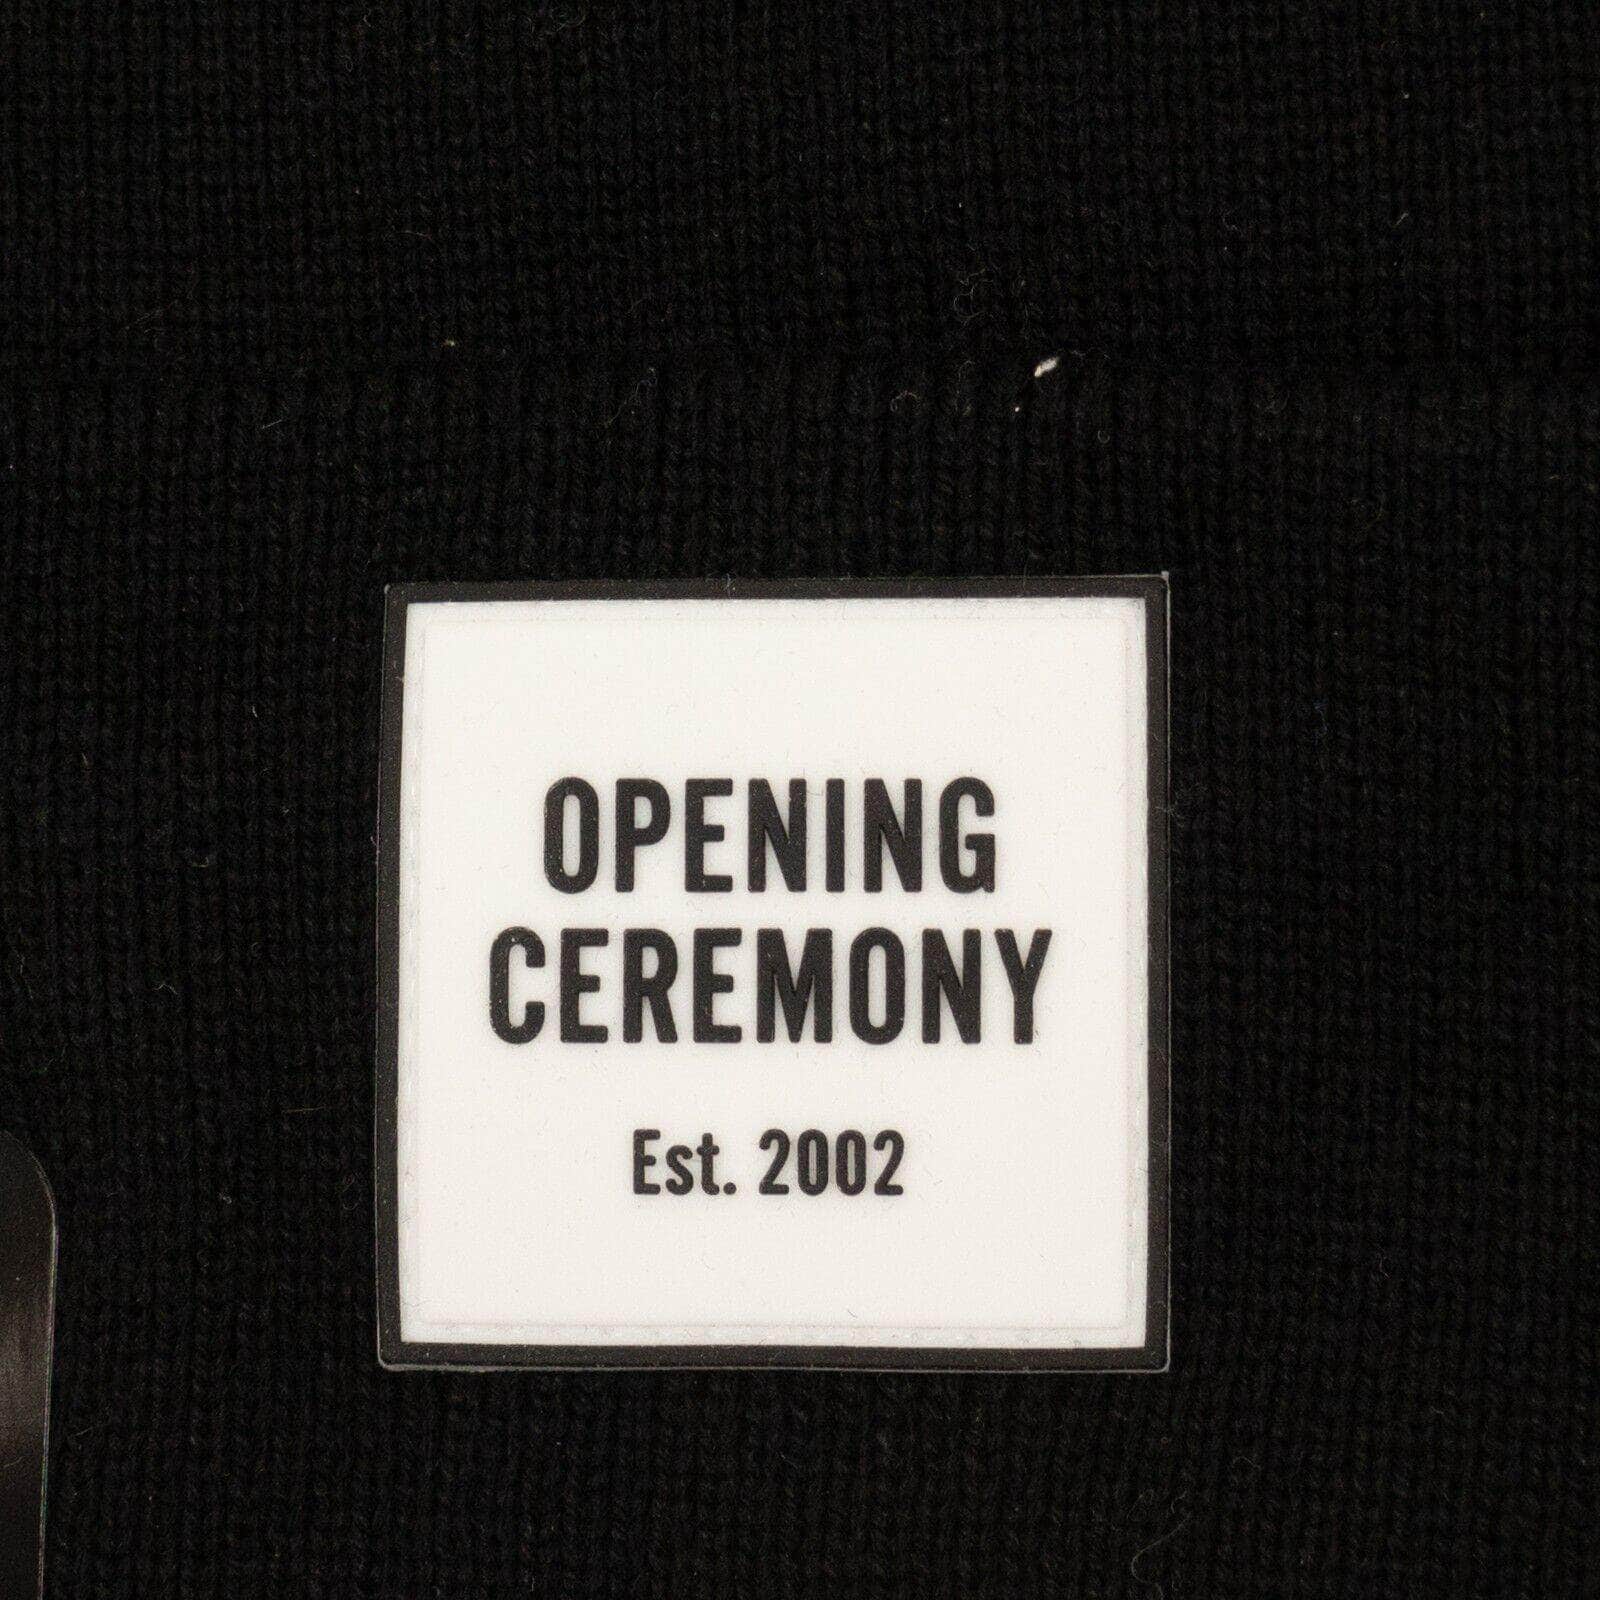 Opening Ceremony channelenable-all, chicmi, couponcollection, gender-mens, gender-womens, main-accessories, mens-shoes, opening-ceremony, size-os, under-250, unisex-hats OS Black Acrylic OC Logo Beanie Hat 95-OCY-3067/OS 95-OCY-3067/OS